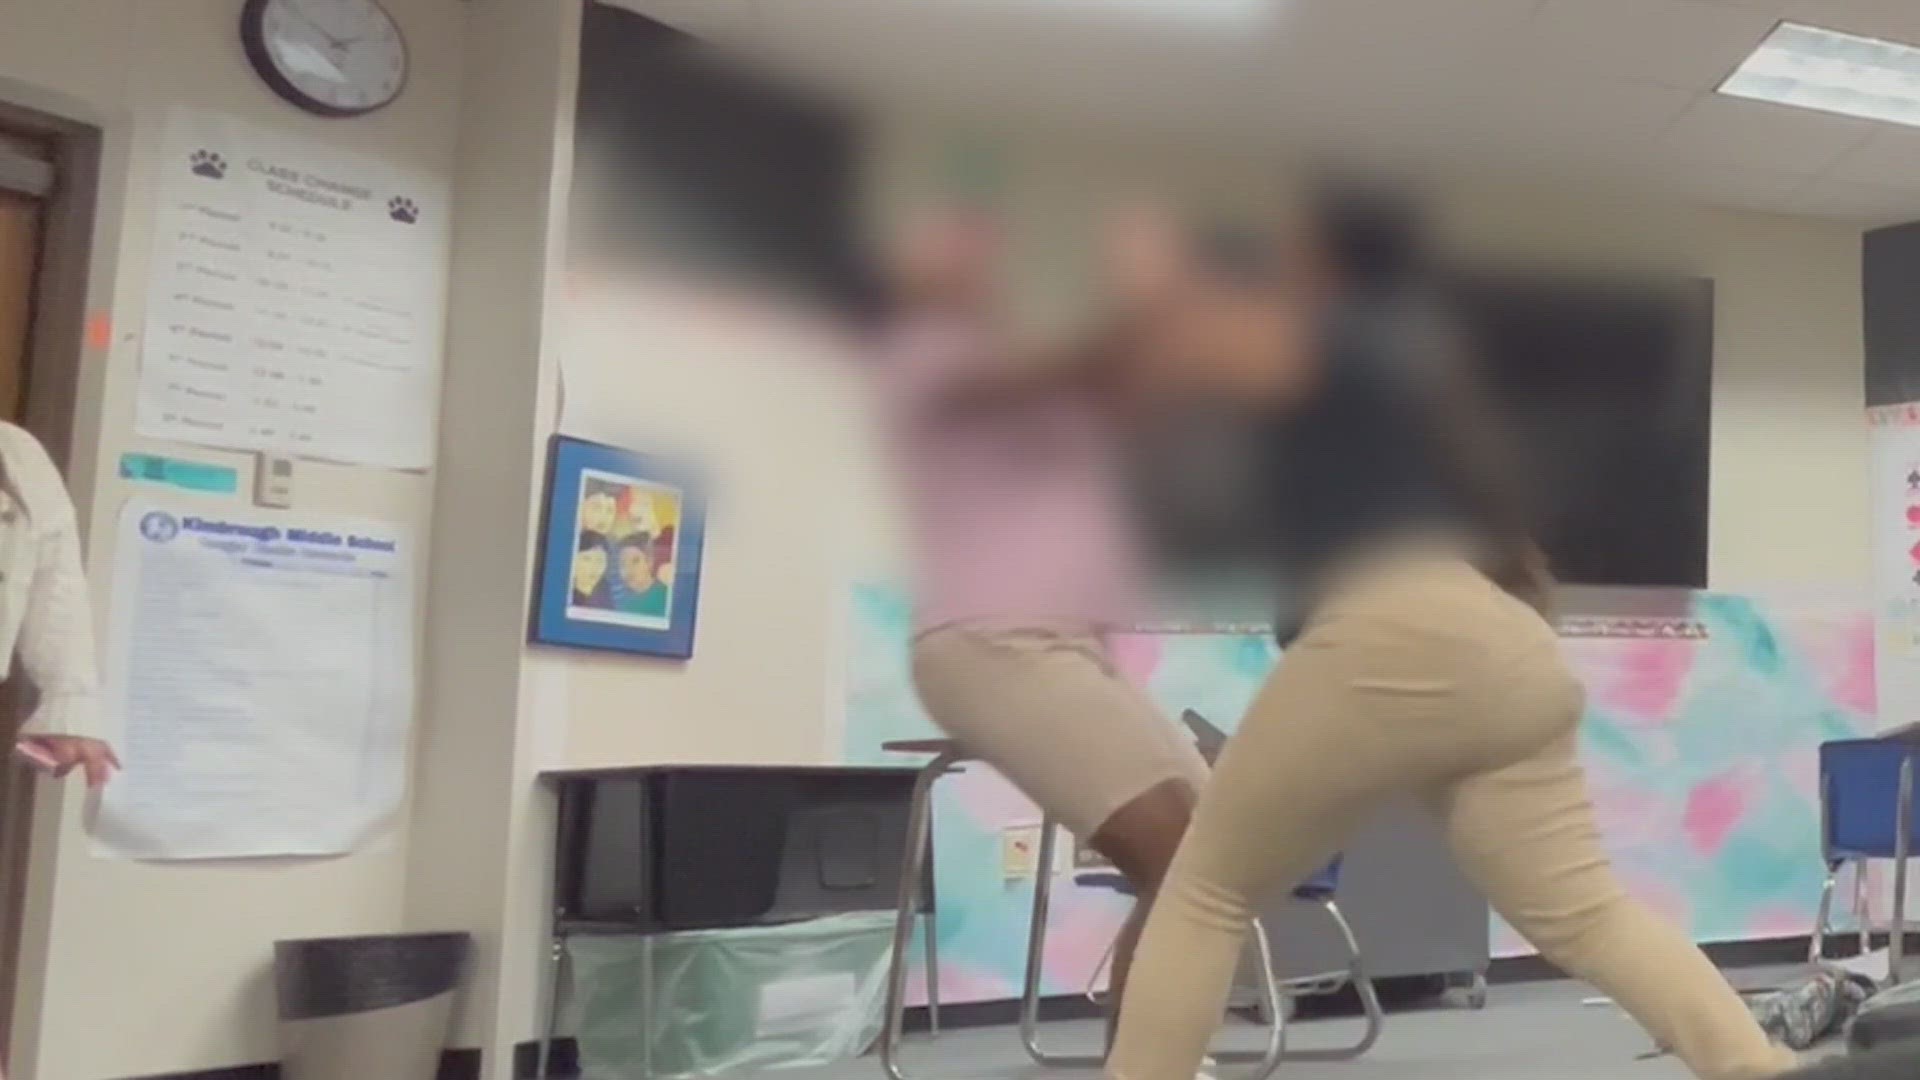 Teacher During Class - Texas teacher who allegedly allowed fights in class arrested | wfaa.com